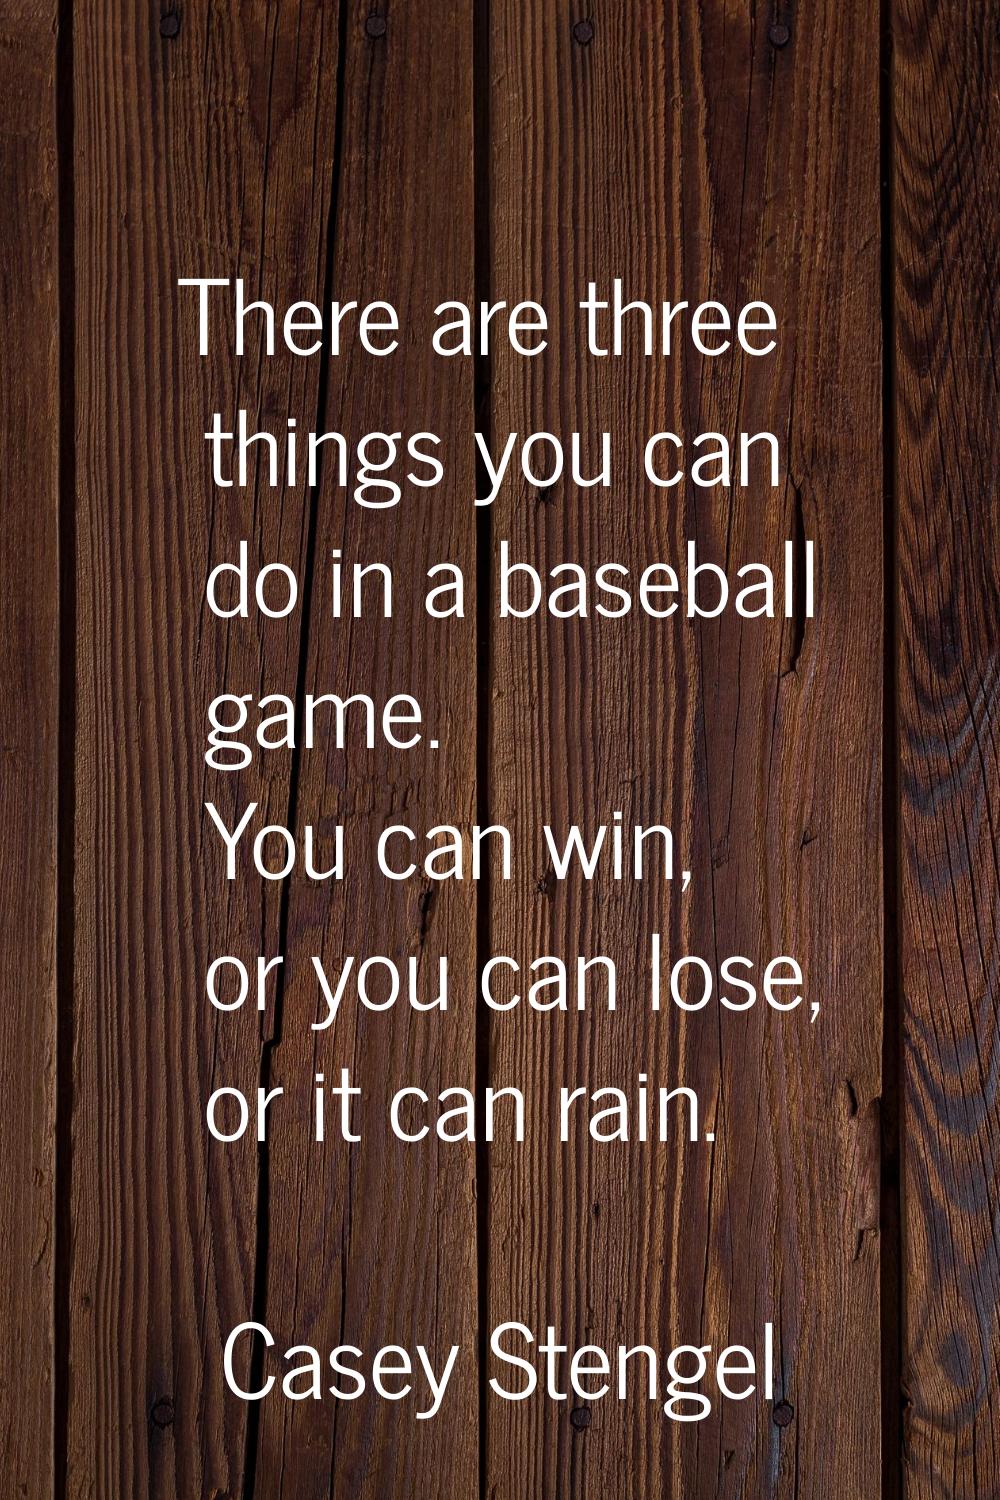 There are three things you can do in a baseball game. You can win, or you can lose, or it can rain.